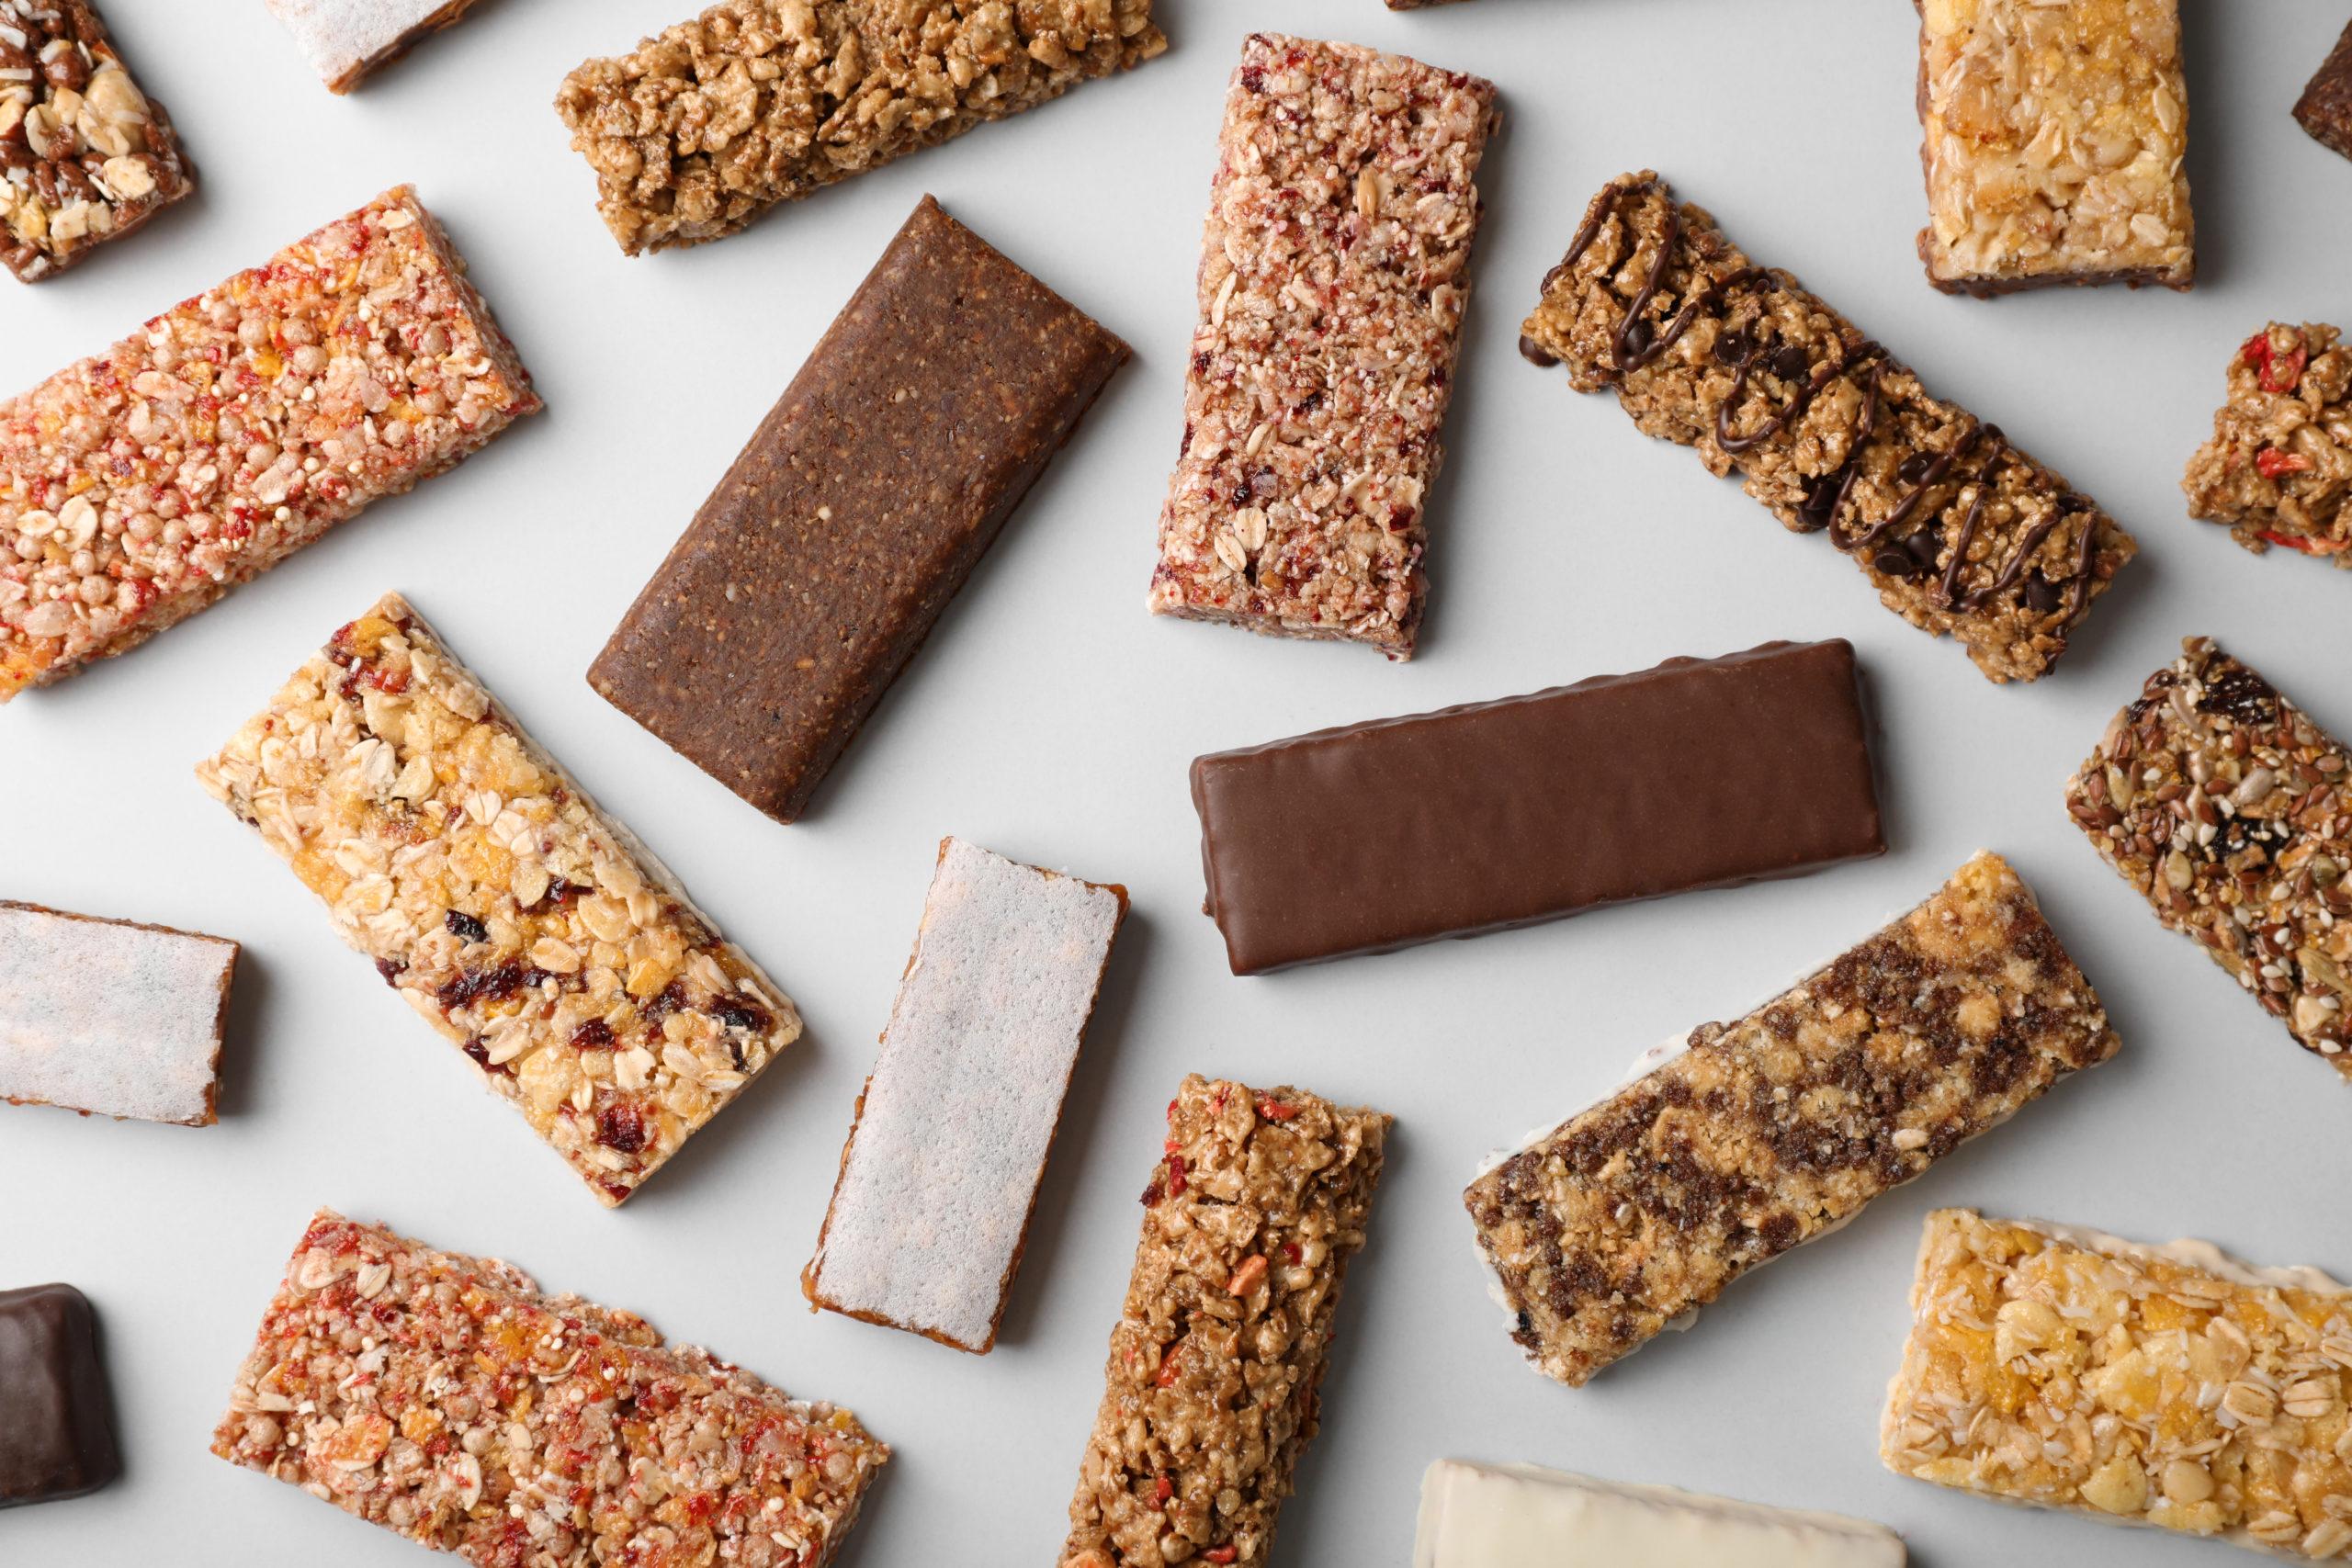 Consume this protein bar which is essential for health